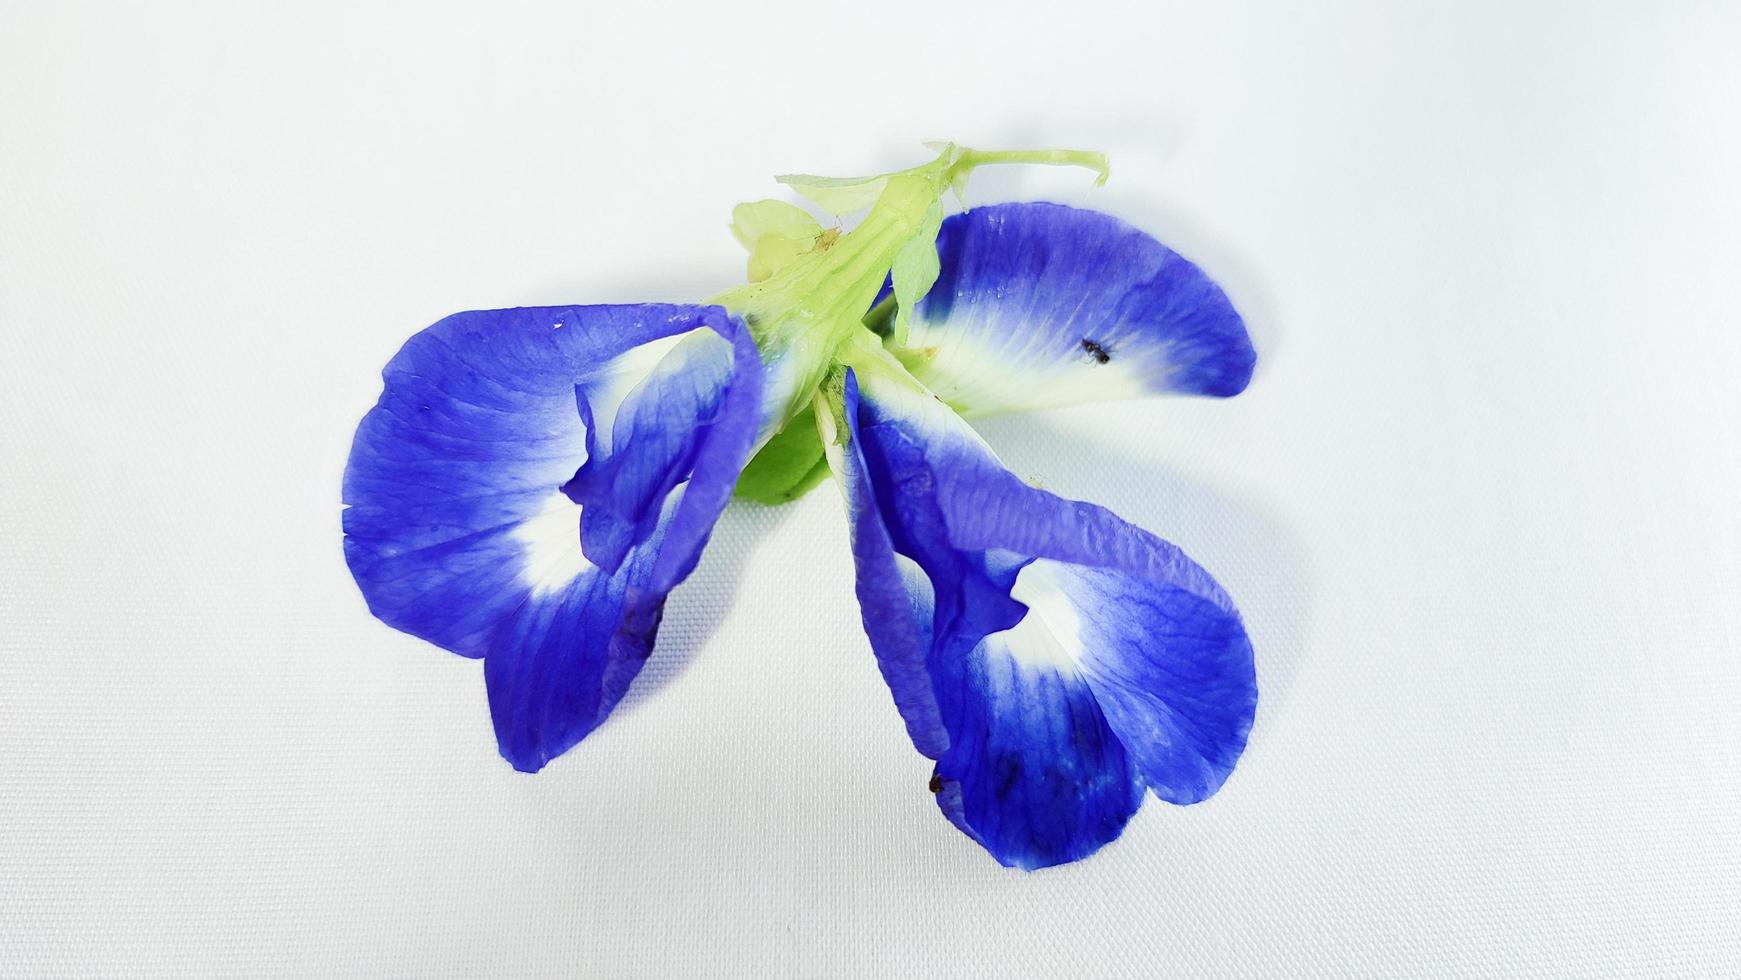 Blue butterfly pea flower. Pea flowers on white background photo